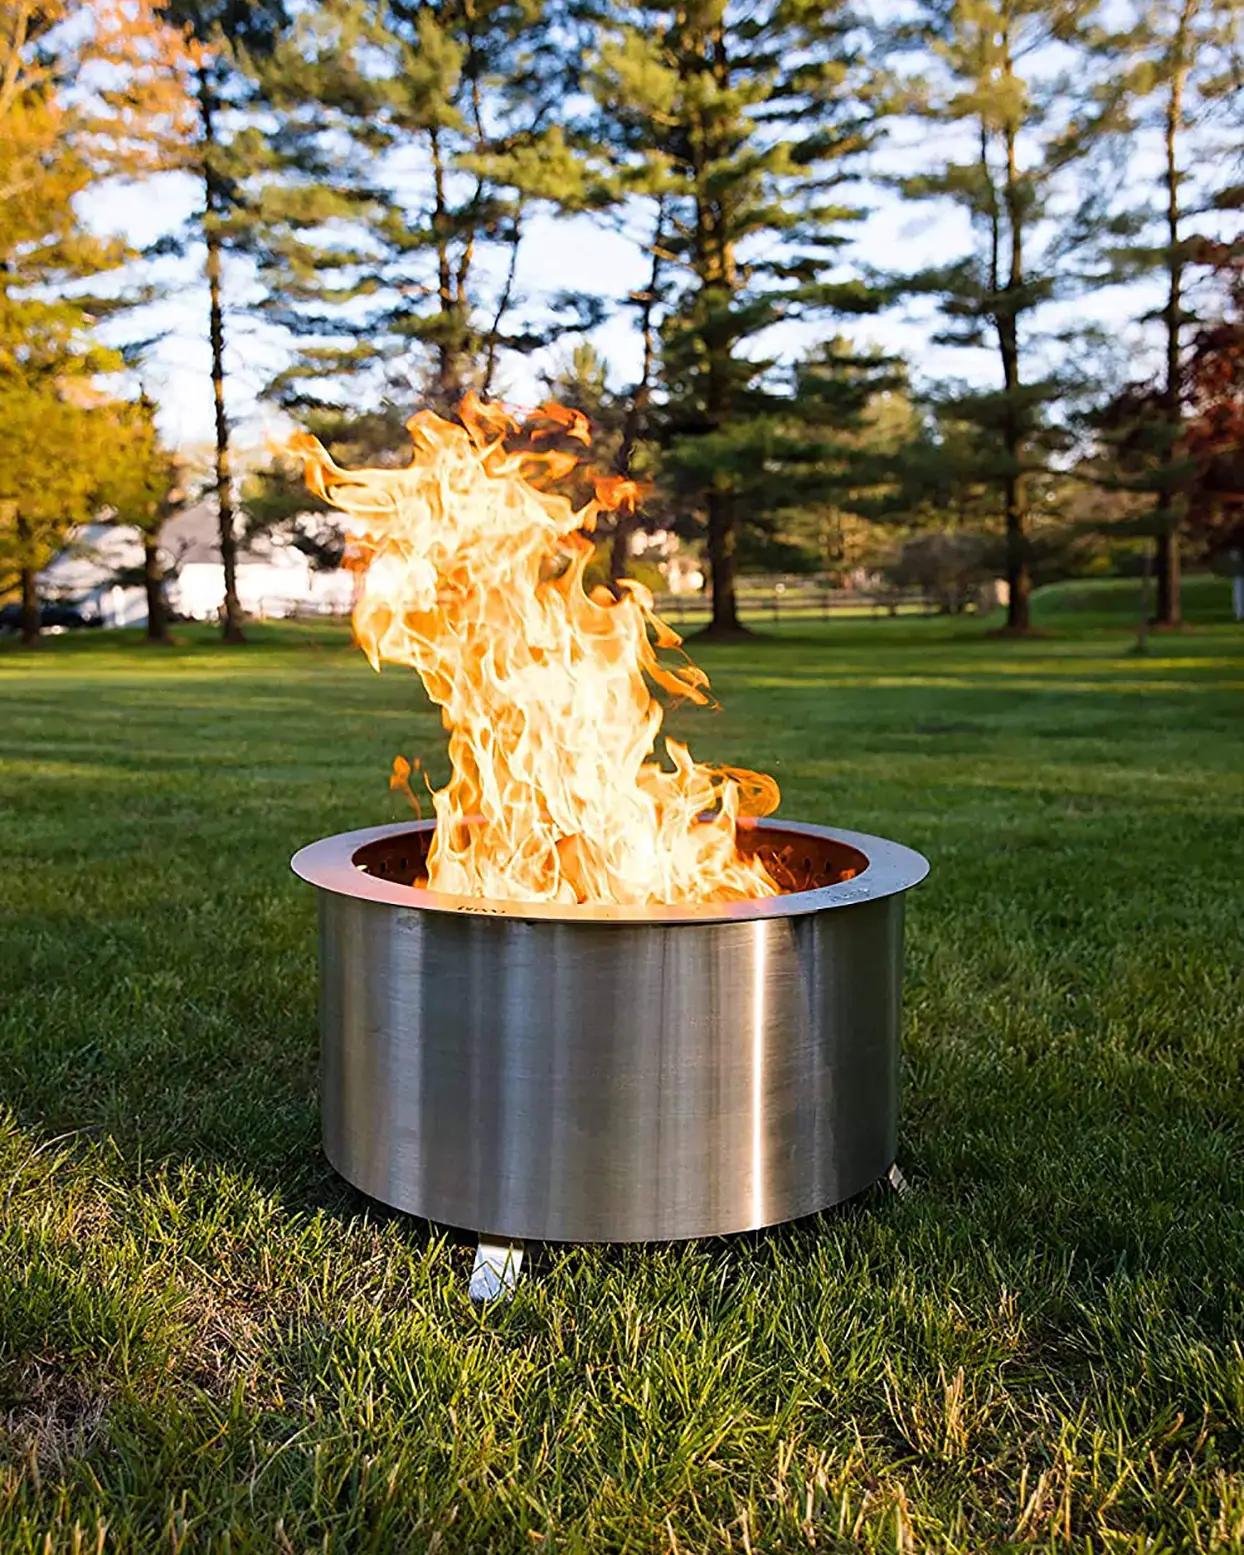 Best Smokeless Fire Pit The Complete, How To Make Smokeless Fire Pit